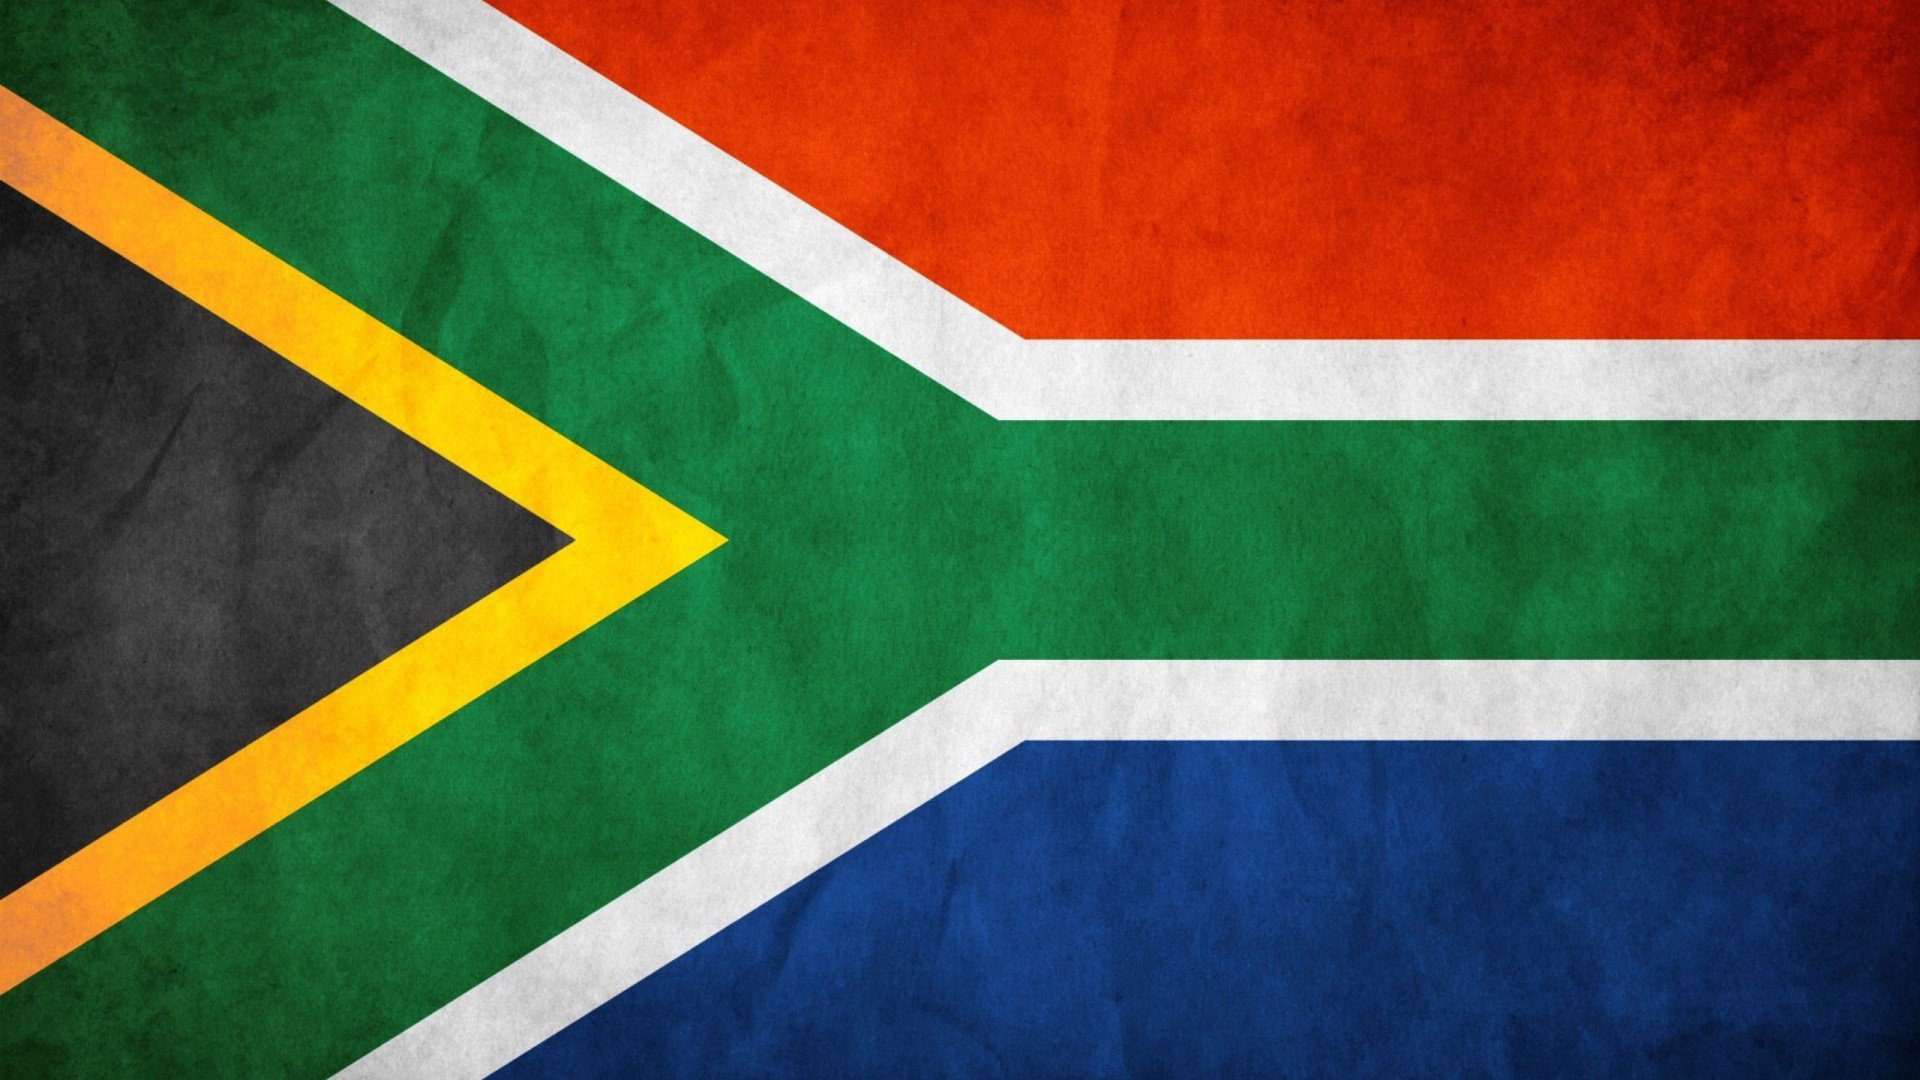 South Africa to build new nuclear plants